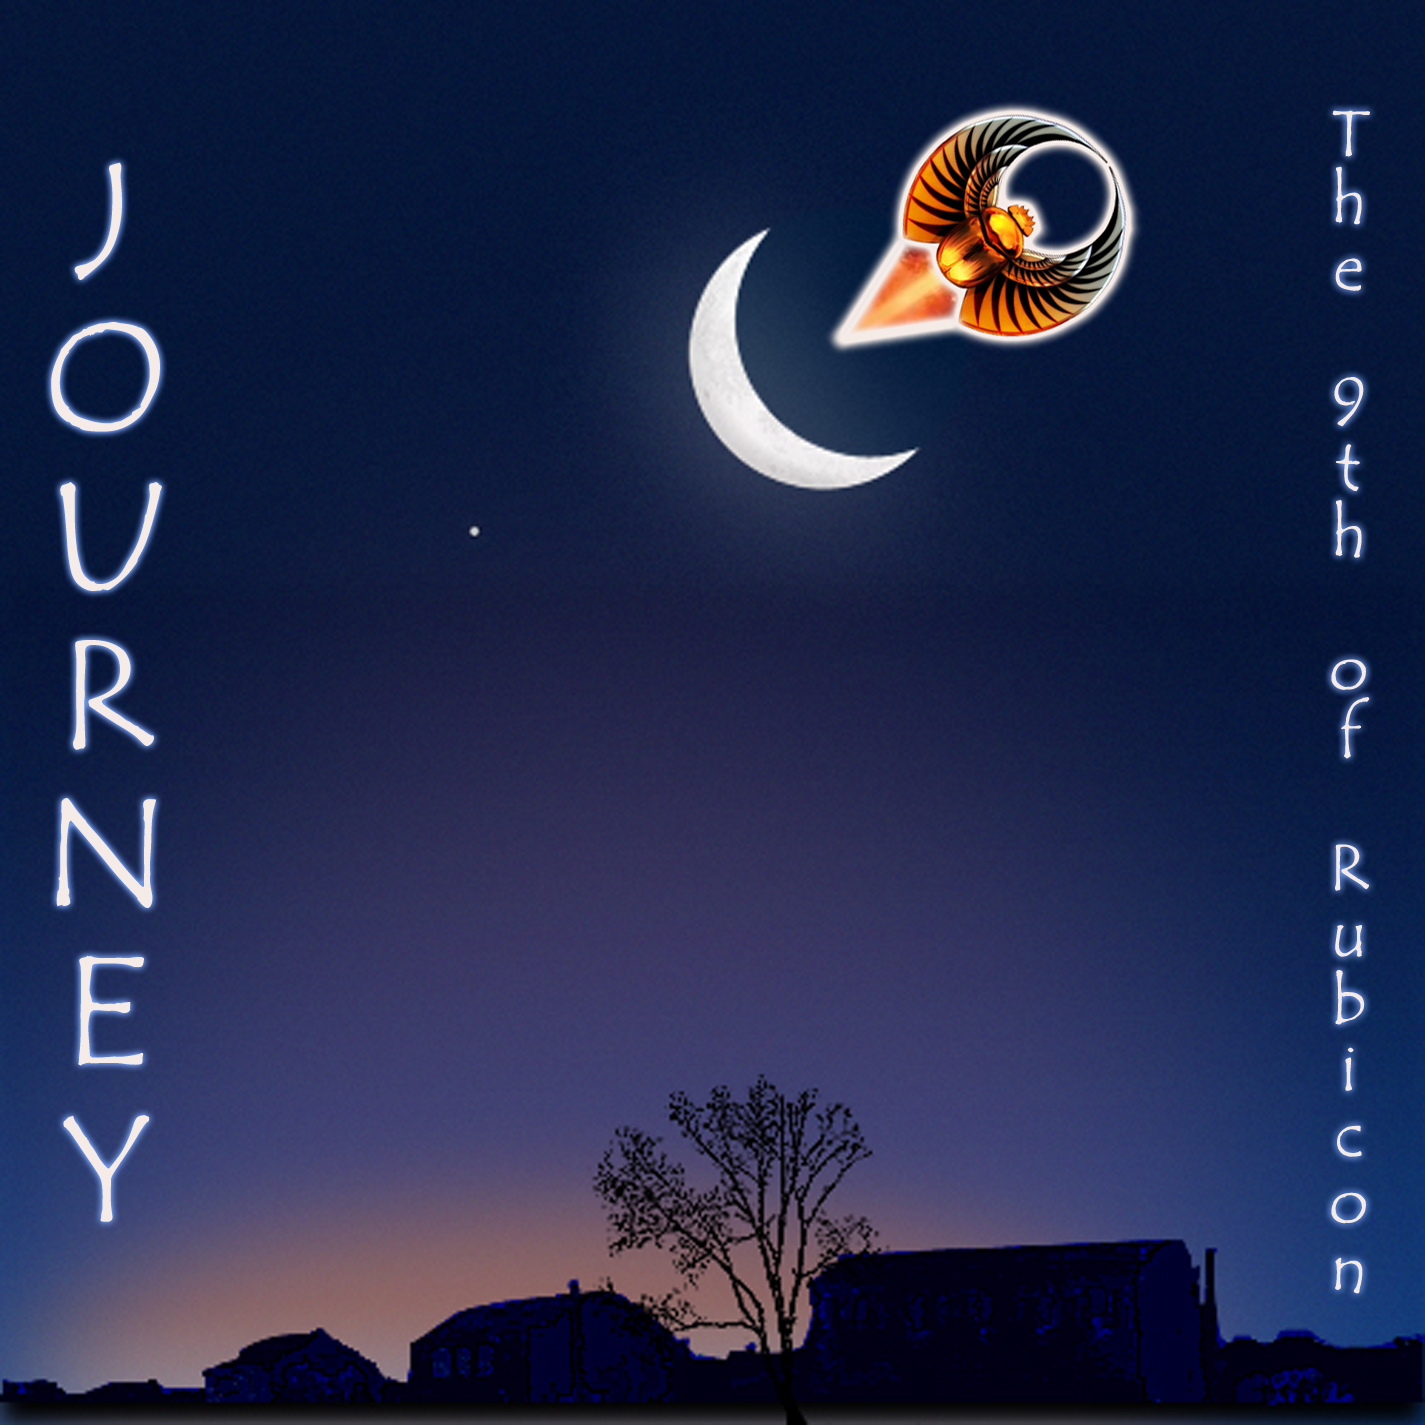 Journey - The 9th of Rubicon - Cover